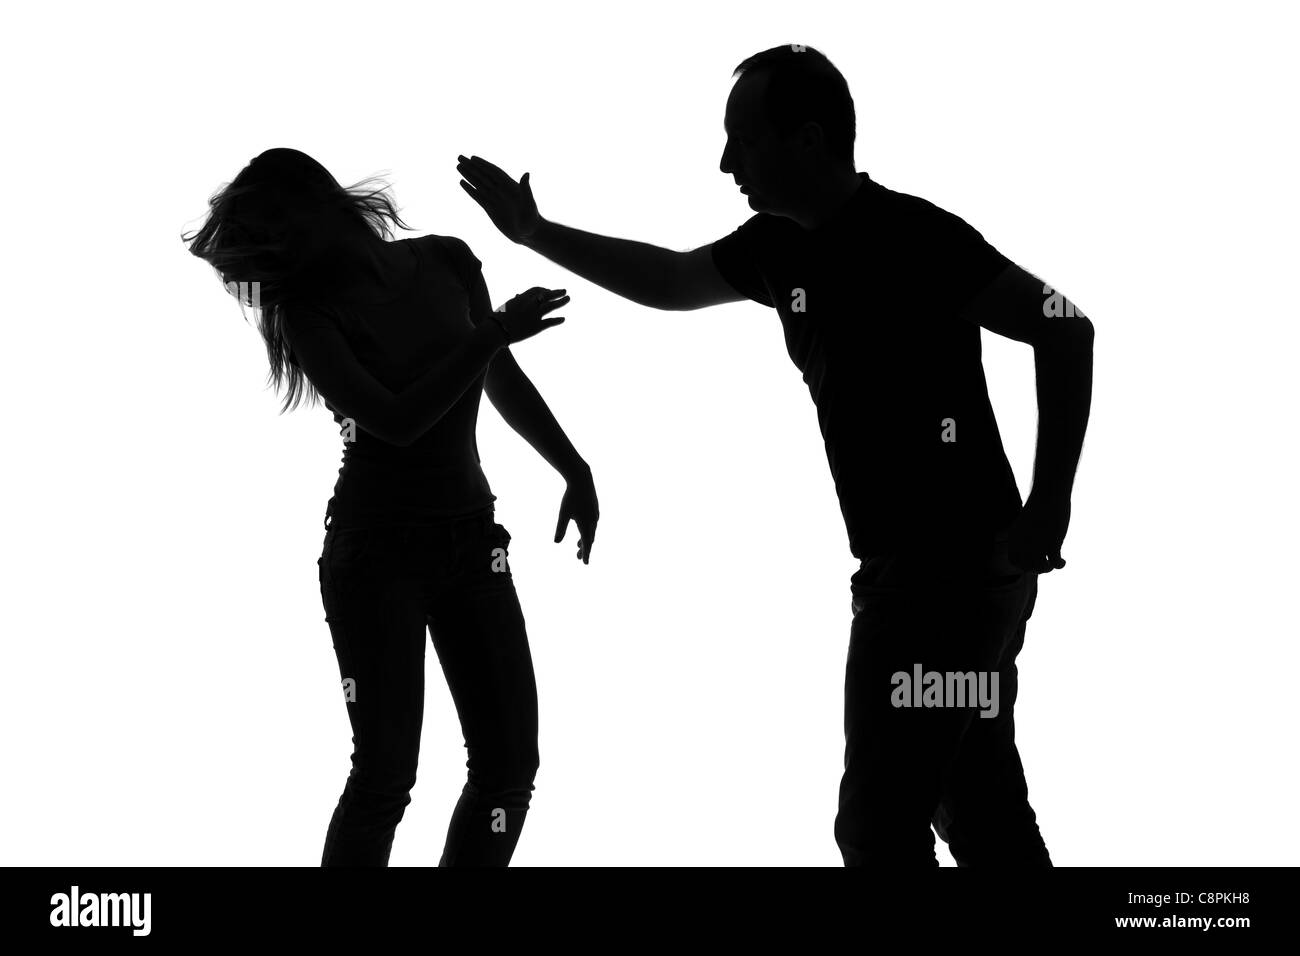 Silhouette of a man slapping a woman Stock Photo